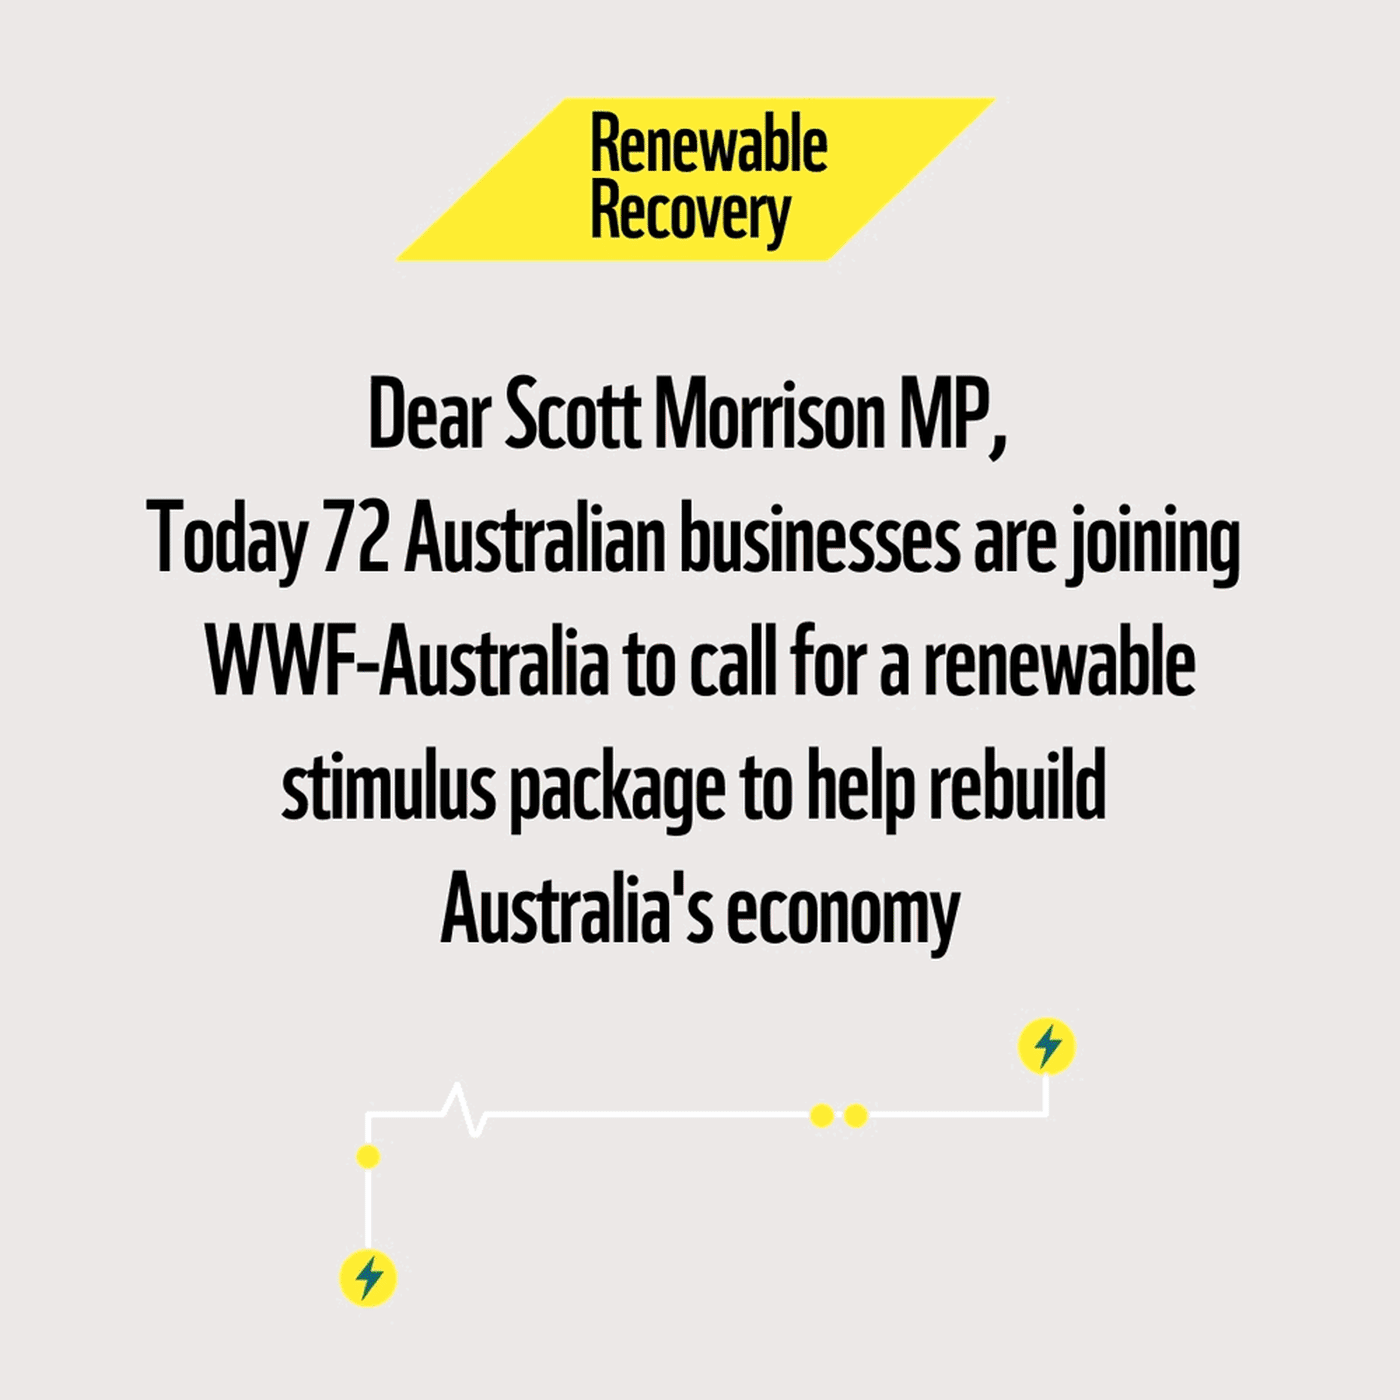 Joint letter - Renewable Recovery